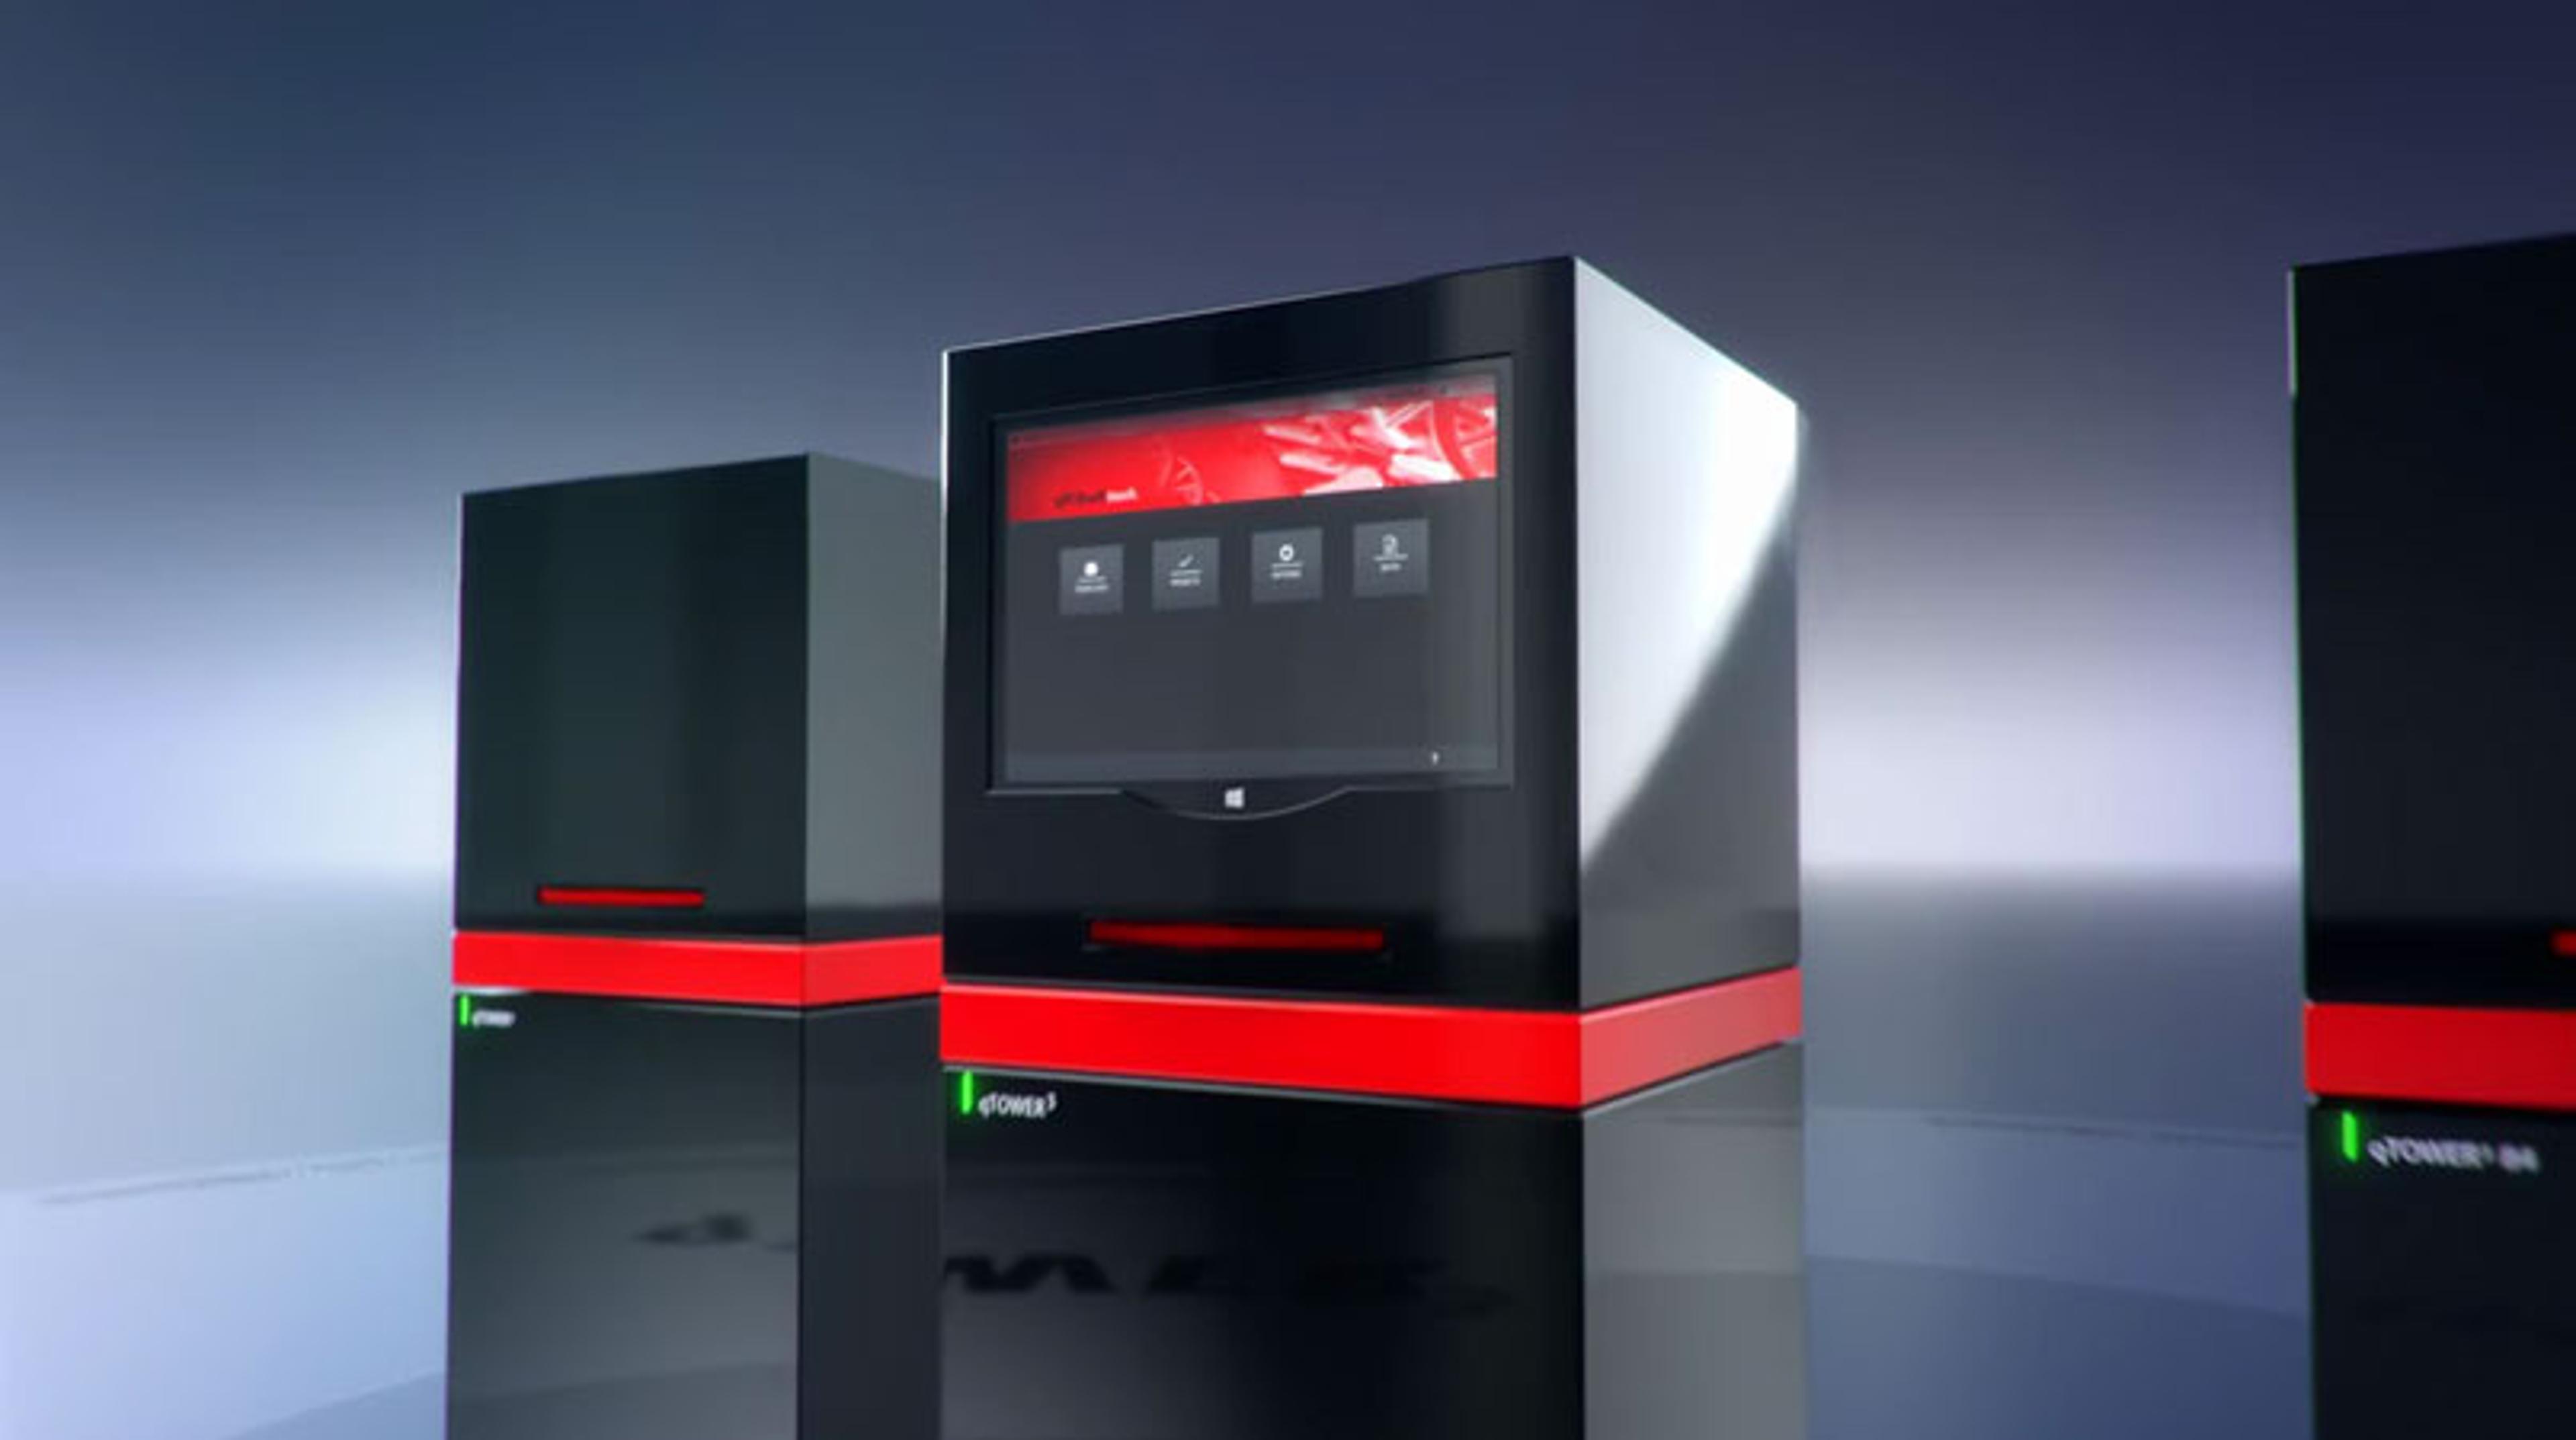 qTOWER³ – the NEW Real-Time PCR Thermal Cycler